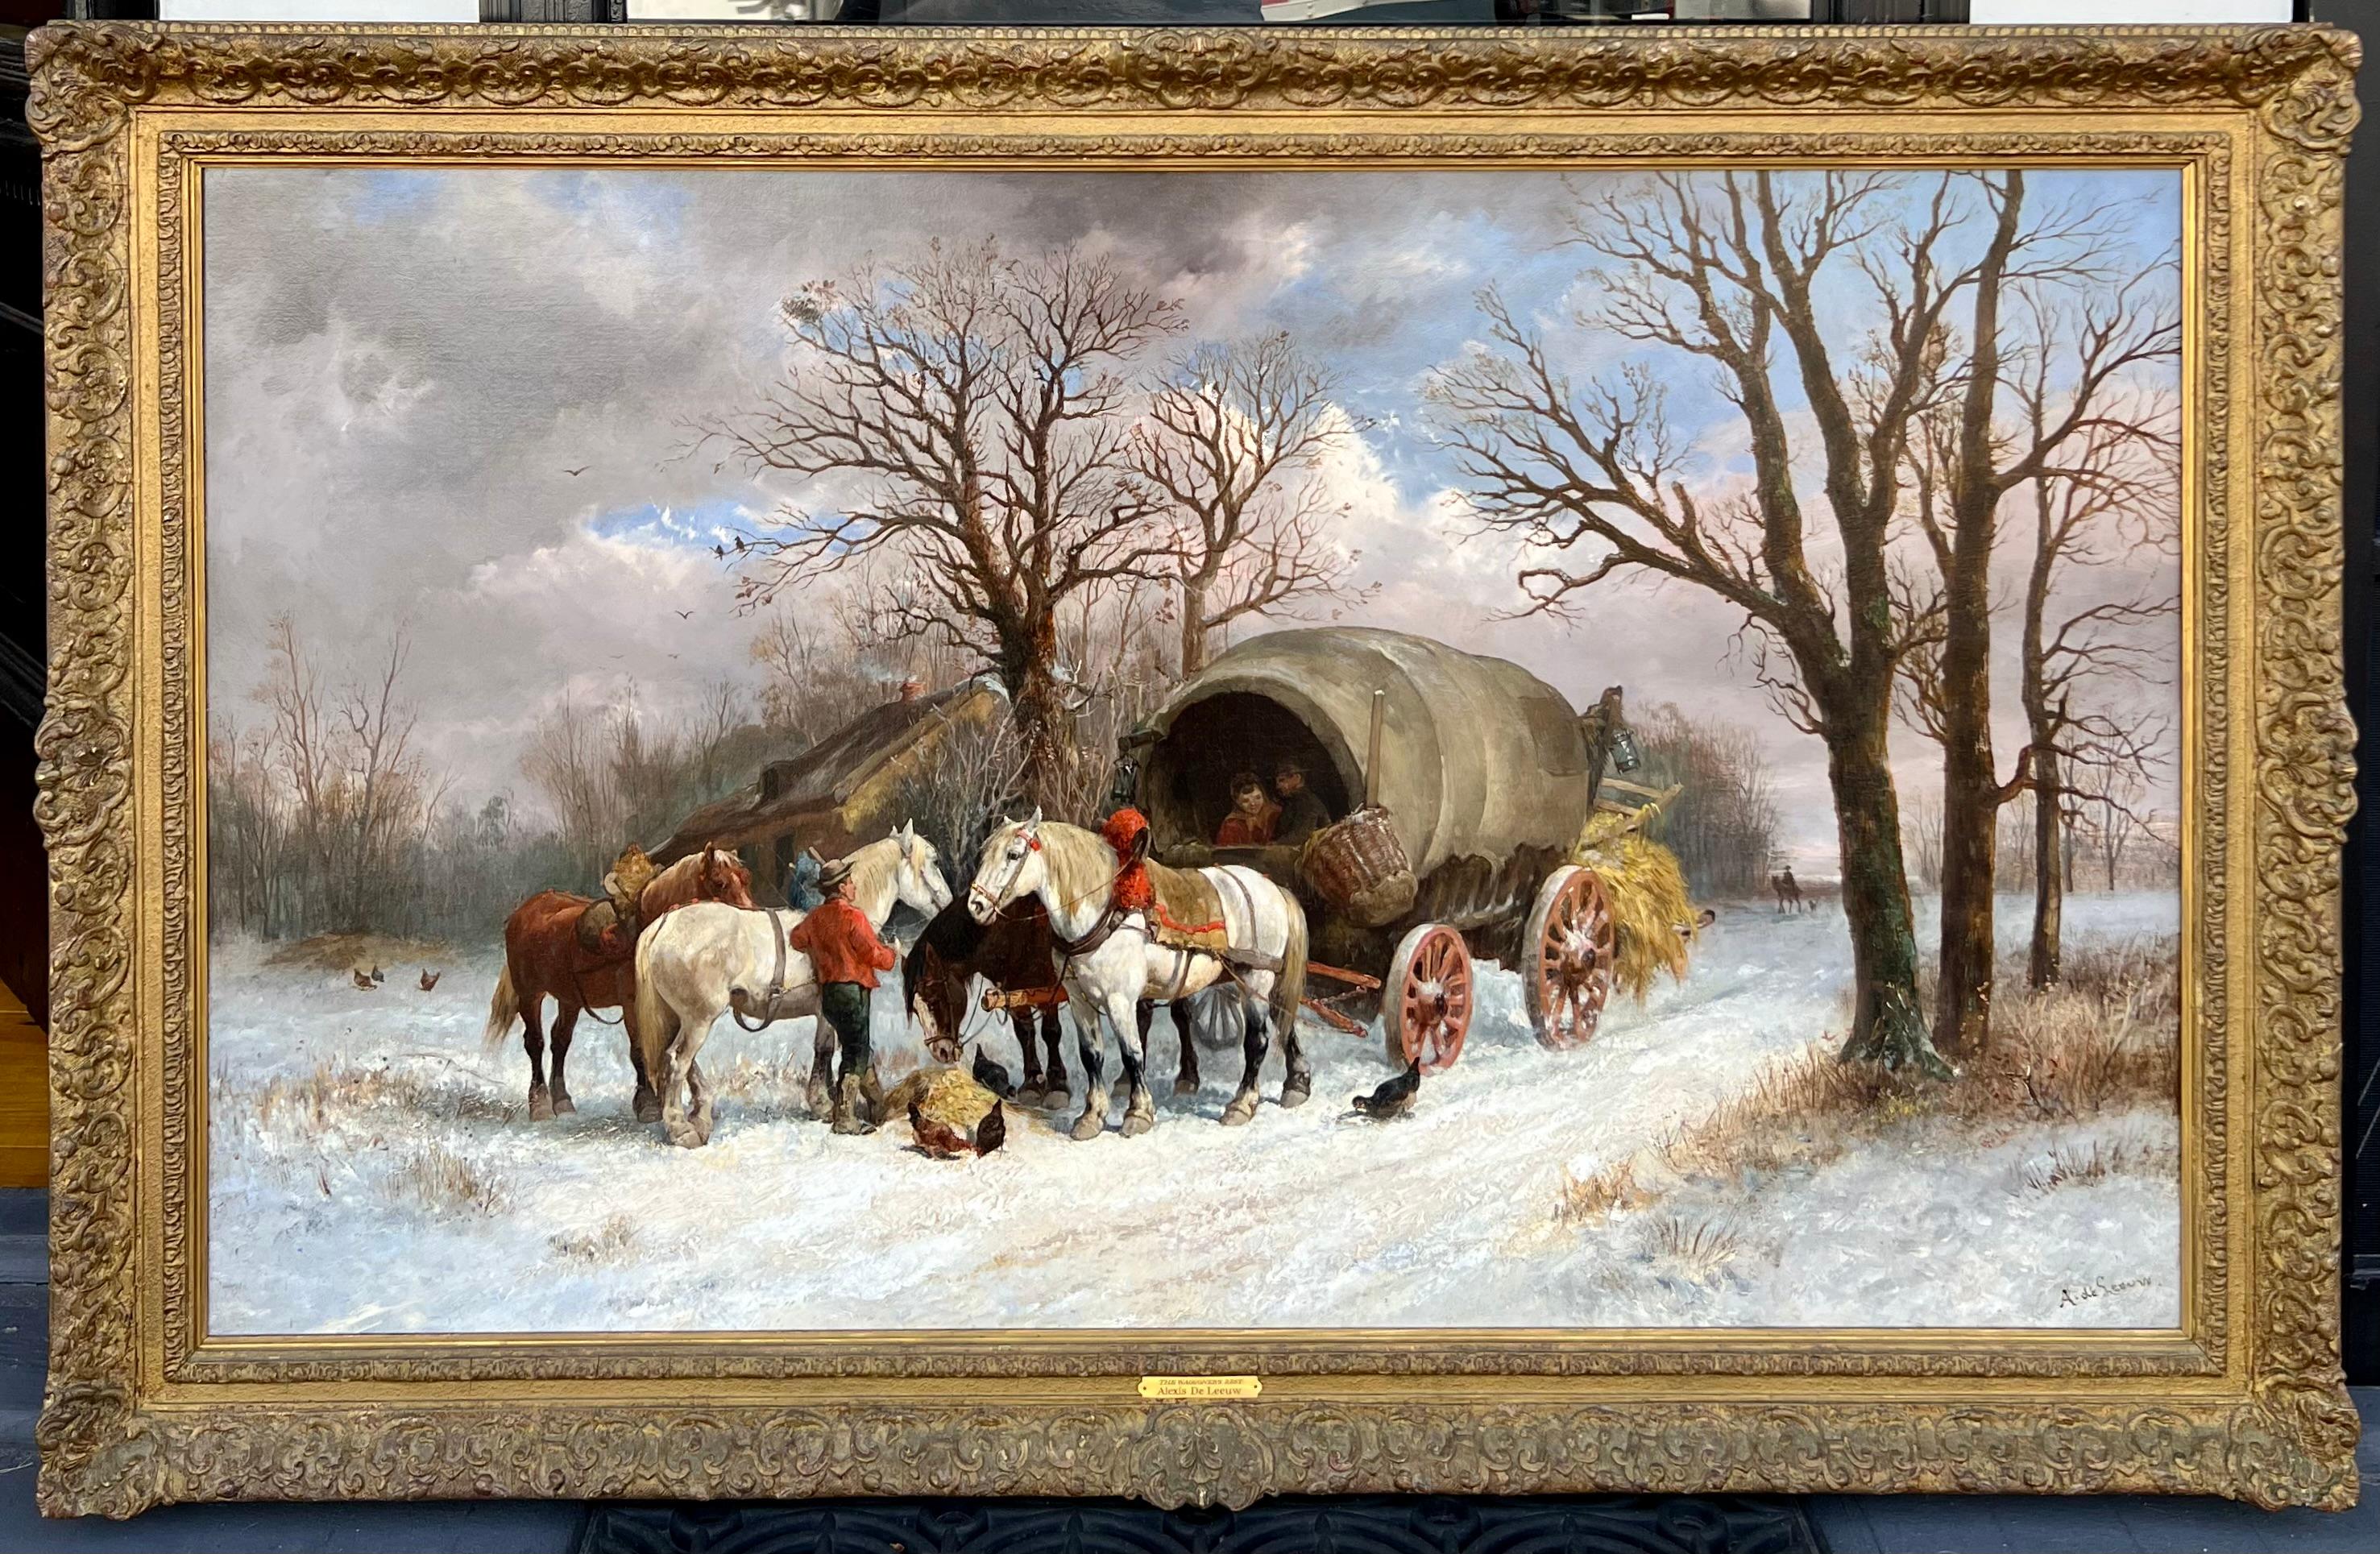 Alexis De Leeuw
Belgian, (1848-1883)
The Wagoneer's Rest
Oil on canvas, signed lower right. 
Provenance: Frost and Reed, London

Size including frame: 36.5 inches x 58.25 inches
Alexis De Leeuw was a Belgian landscape and animal painter who